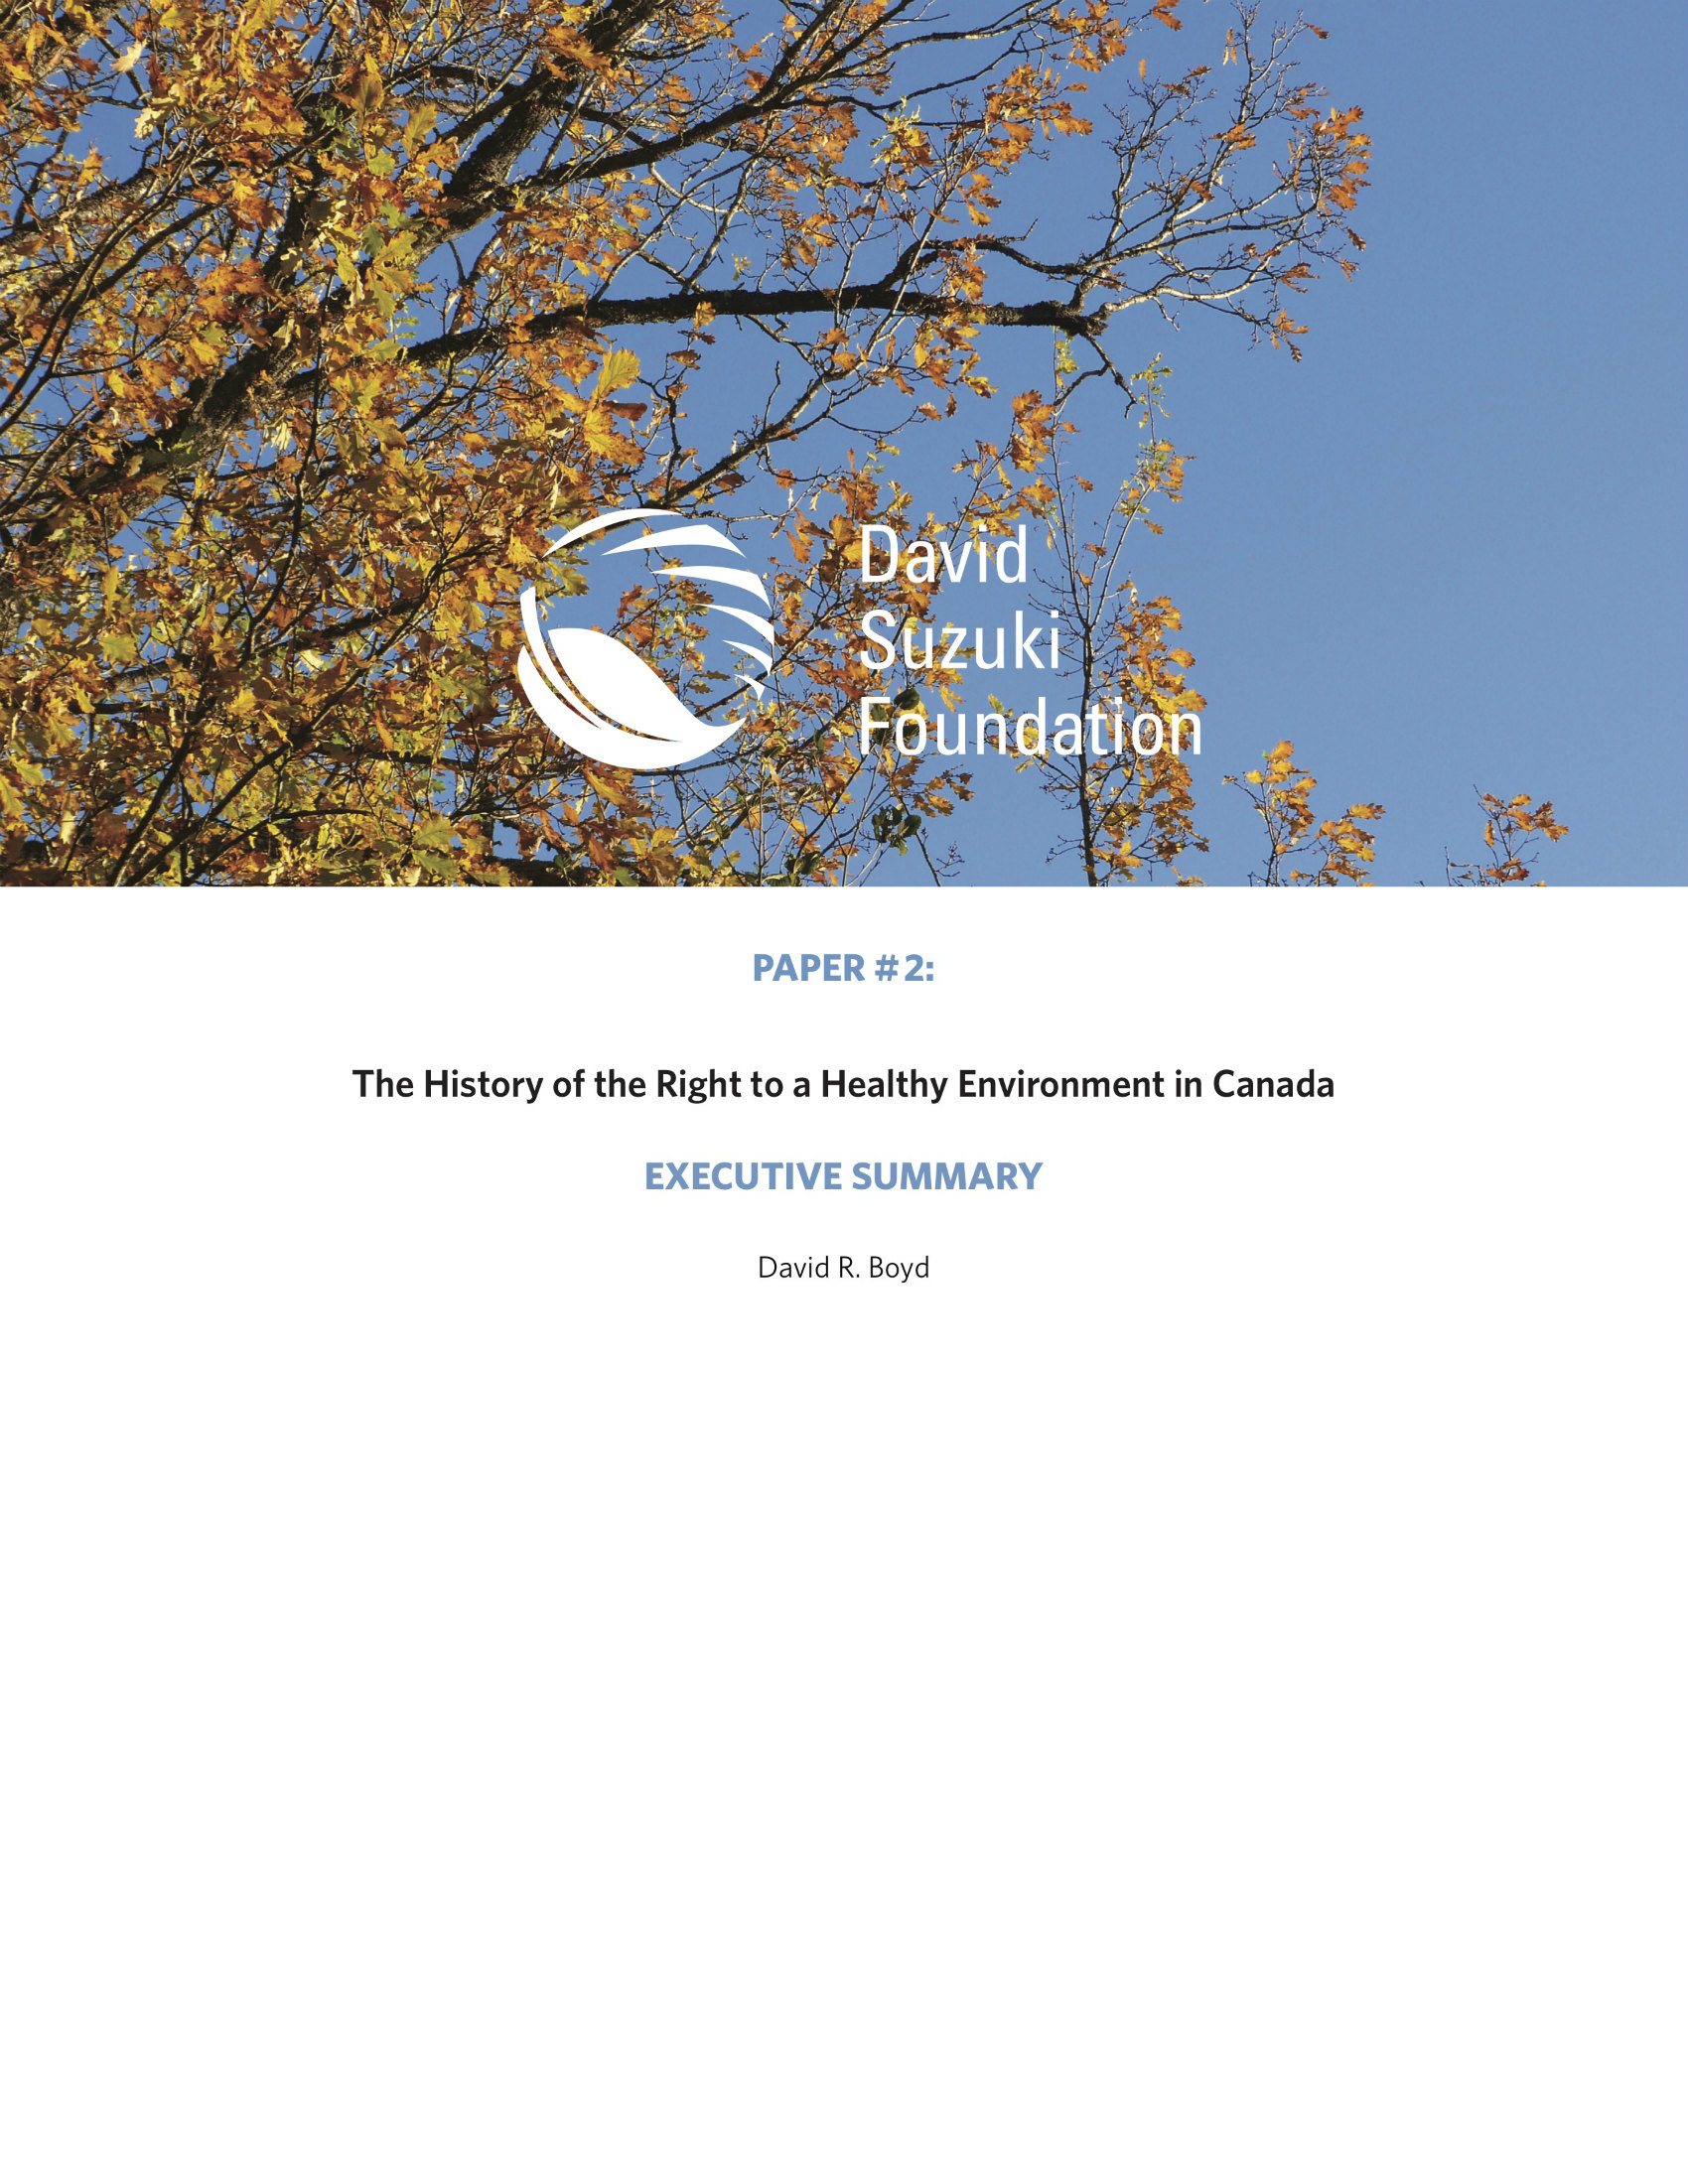 EXECUTIVE SUMMARY — The History of the Right to a Healthy Environment in Canada